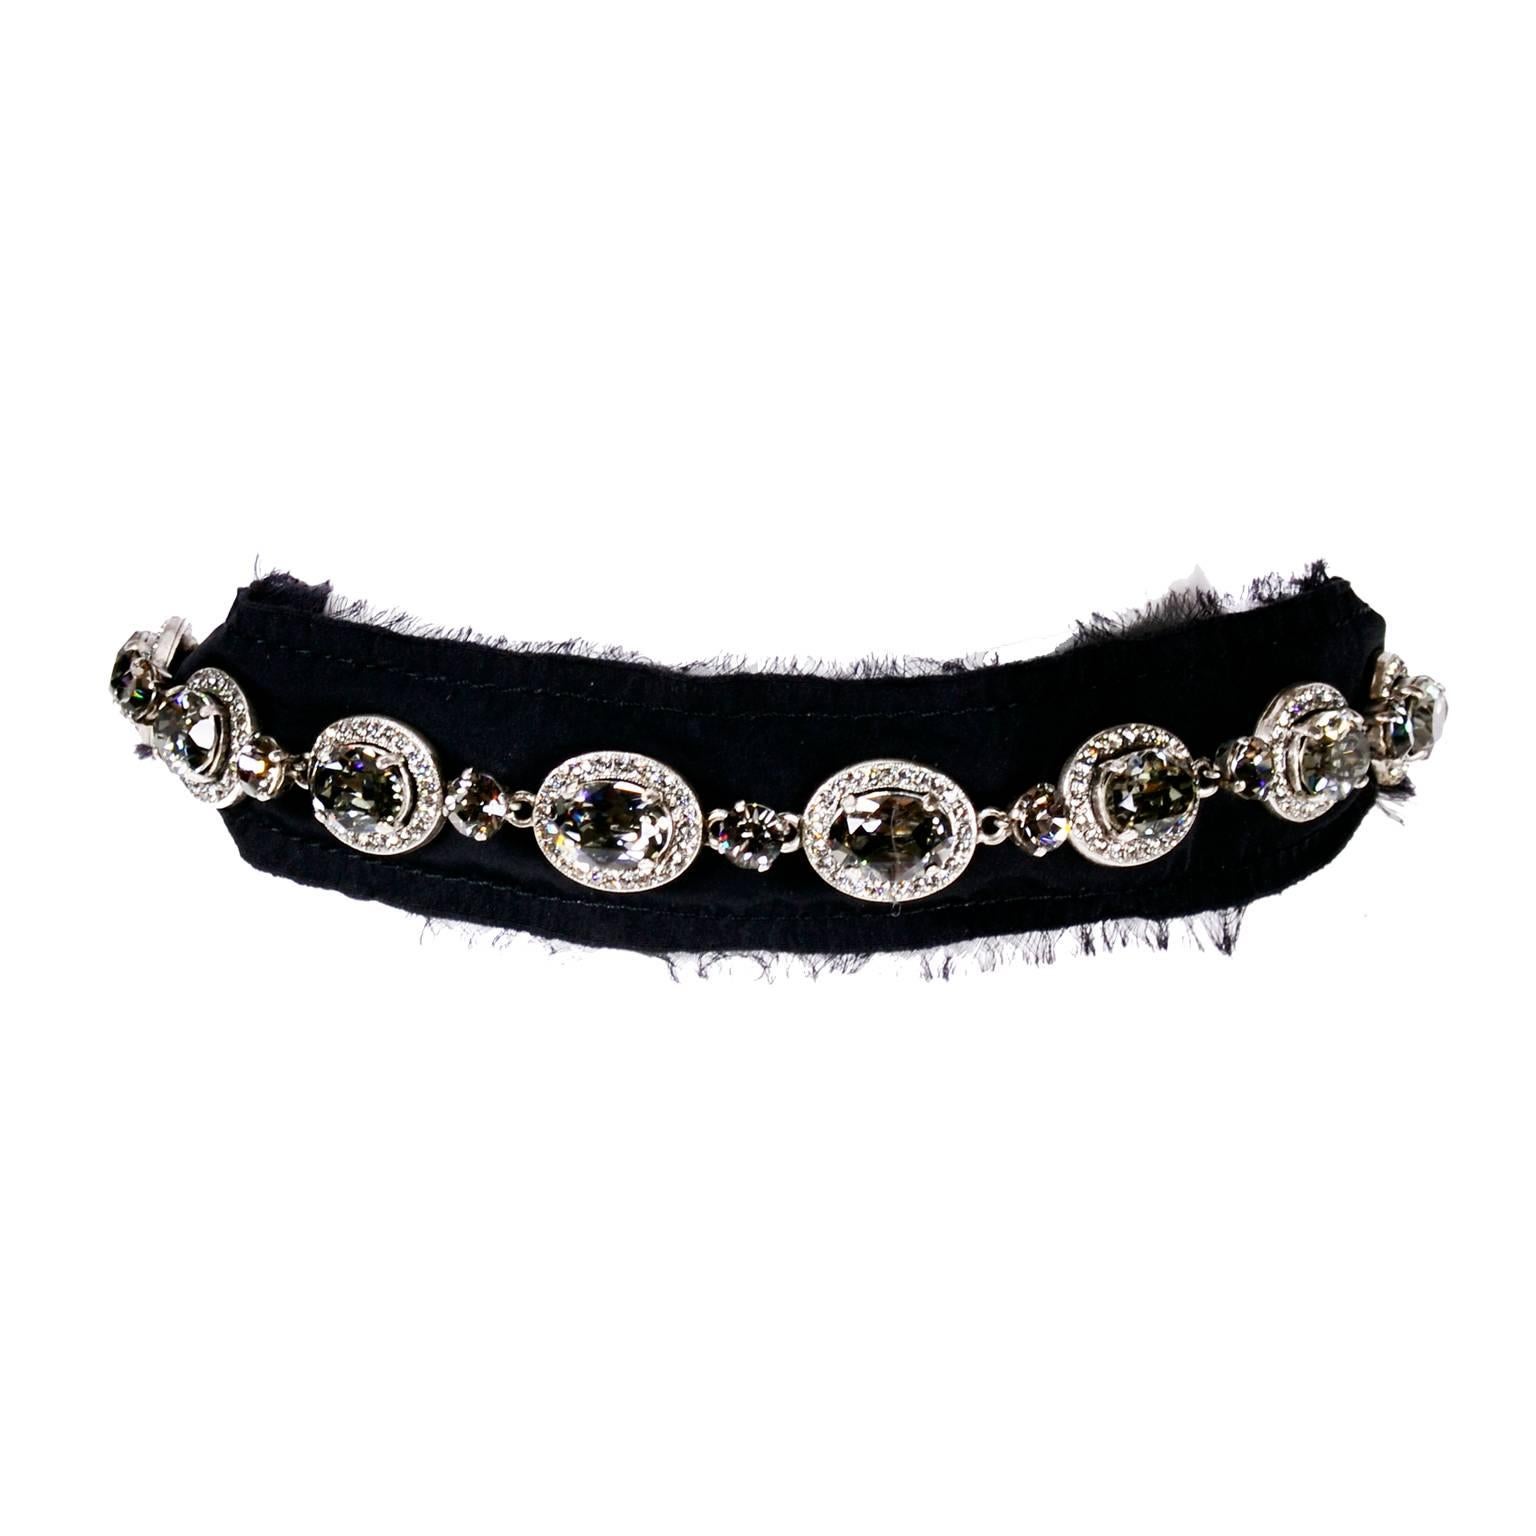 This is an absolutely gorgeous Lanvin Ribbon Necklace in black silk with raw edges and 18 x 20 mm jeweled smokey crystal ovals surrounded by clear crystals and a silver link chain with spring ring clasp. This necklace was designed by Alber Elbaz and